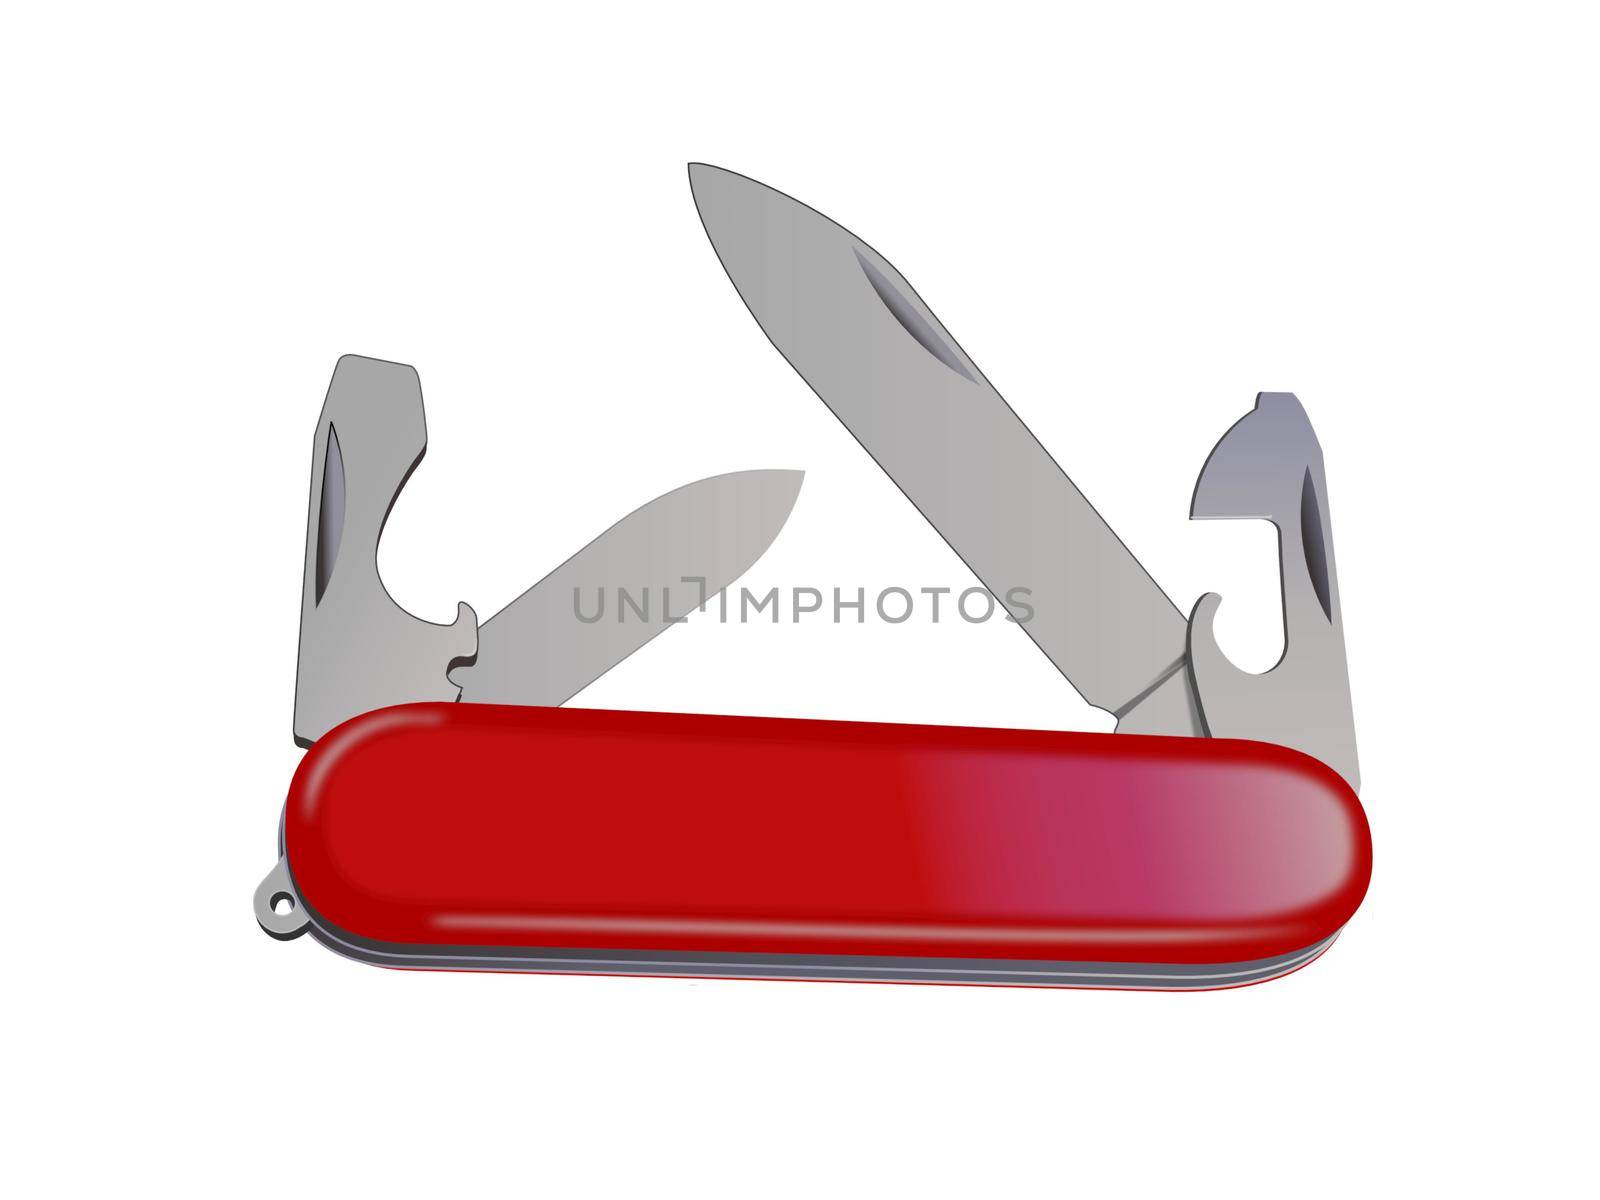 very nice penknife on white background - 3d rendering by mariephotos